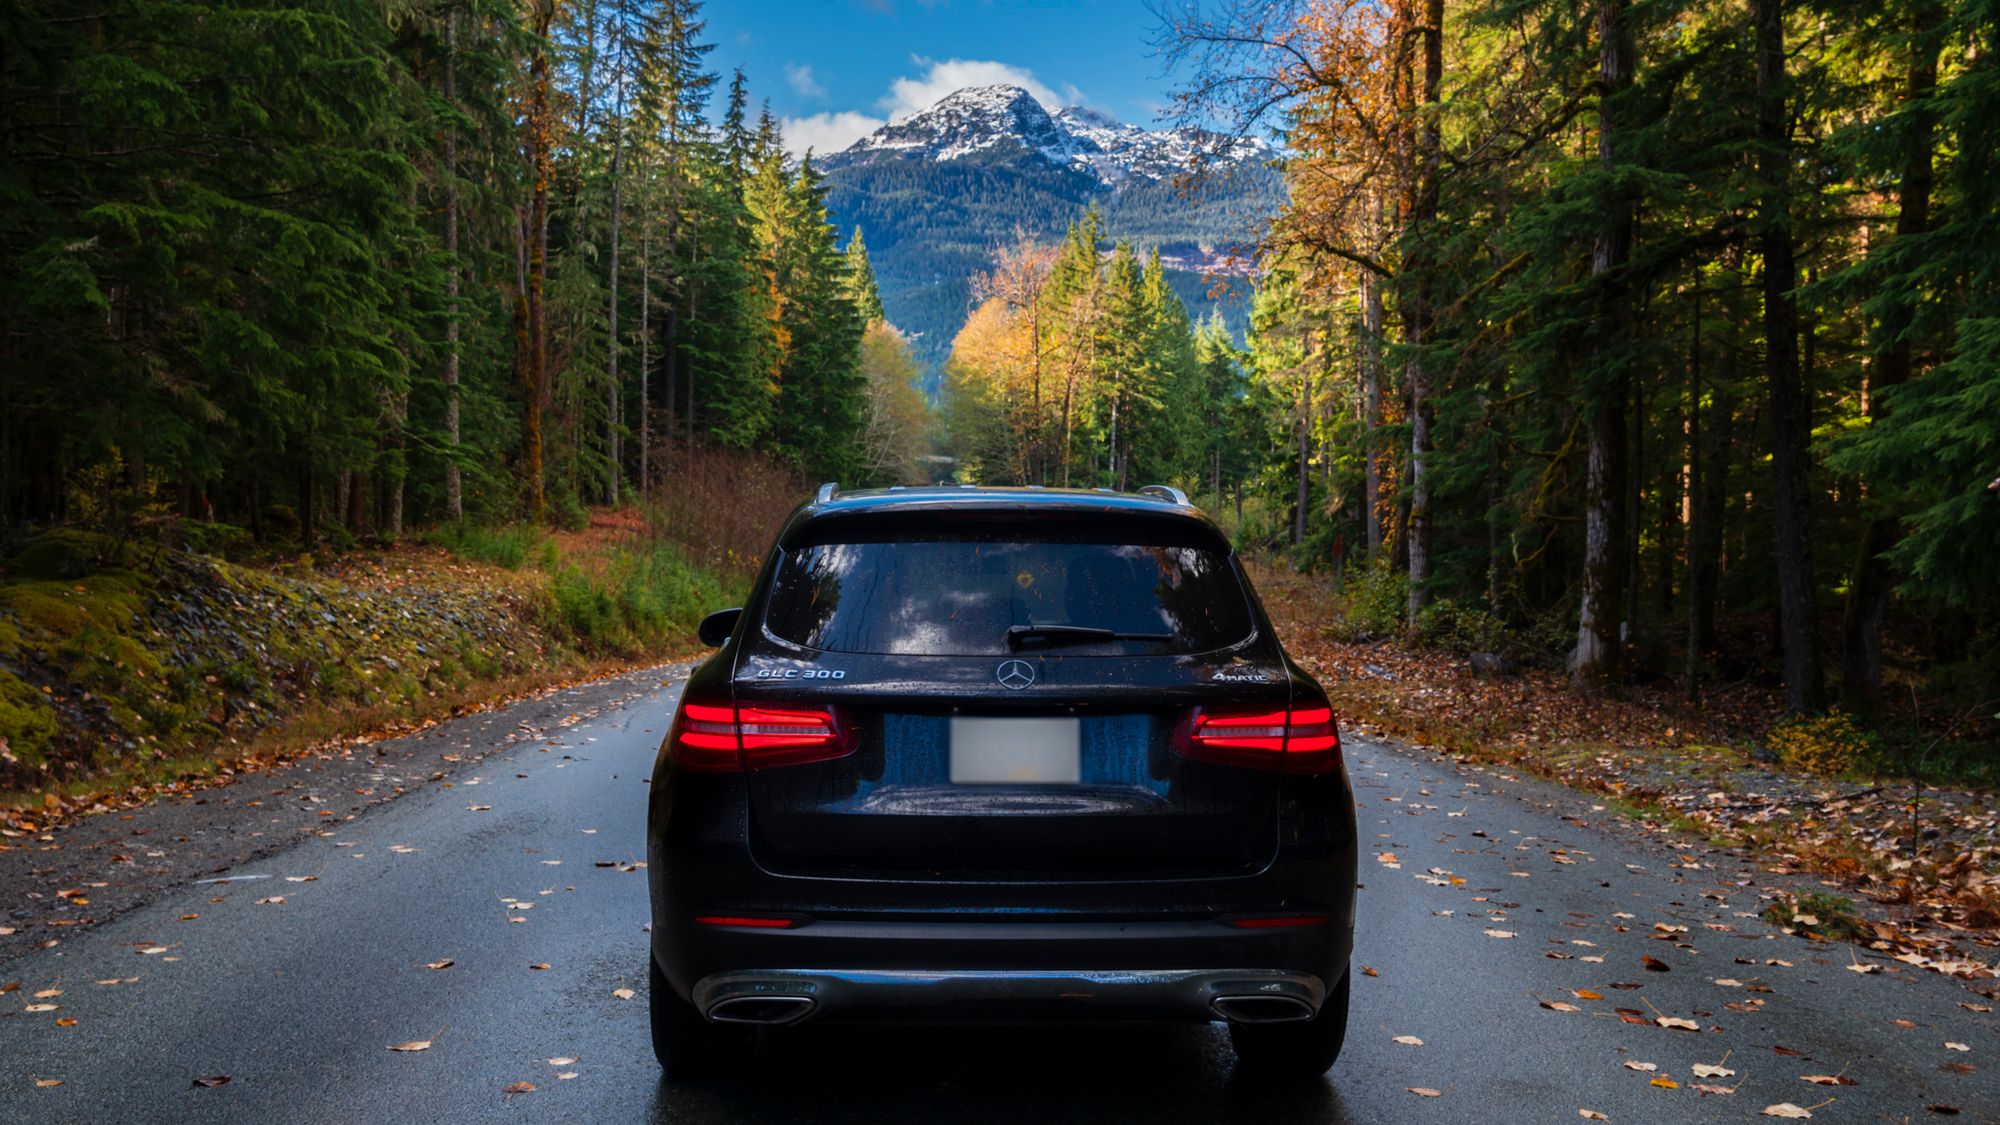 Driving through the Icefields Parkway with a SUV rental from Enterprise.